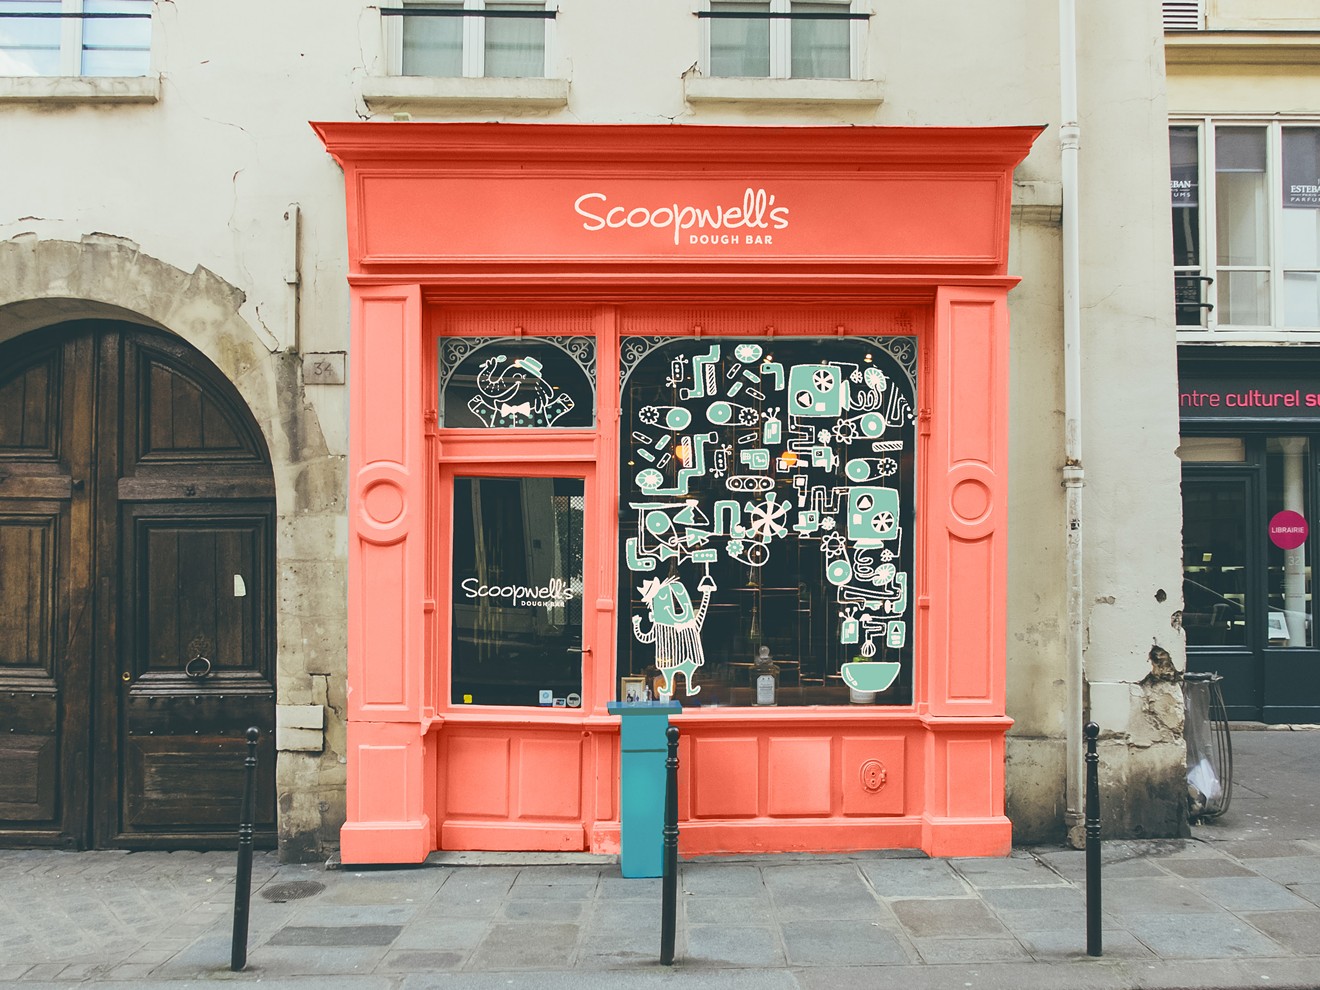 A mockup of the future storefront for Scoopwell's Dough Bar